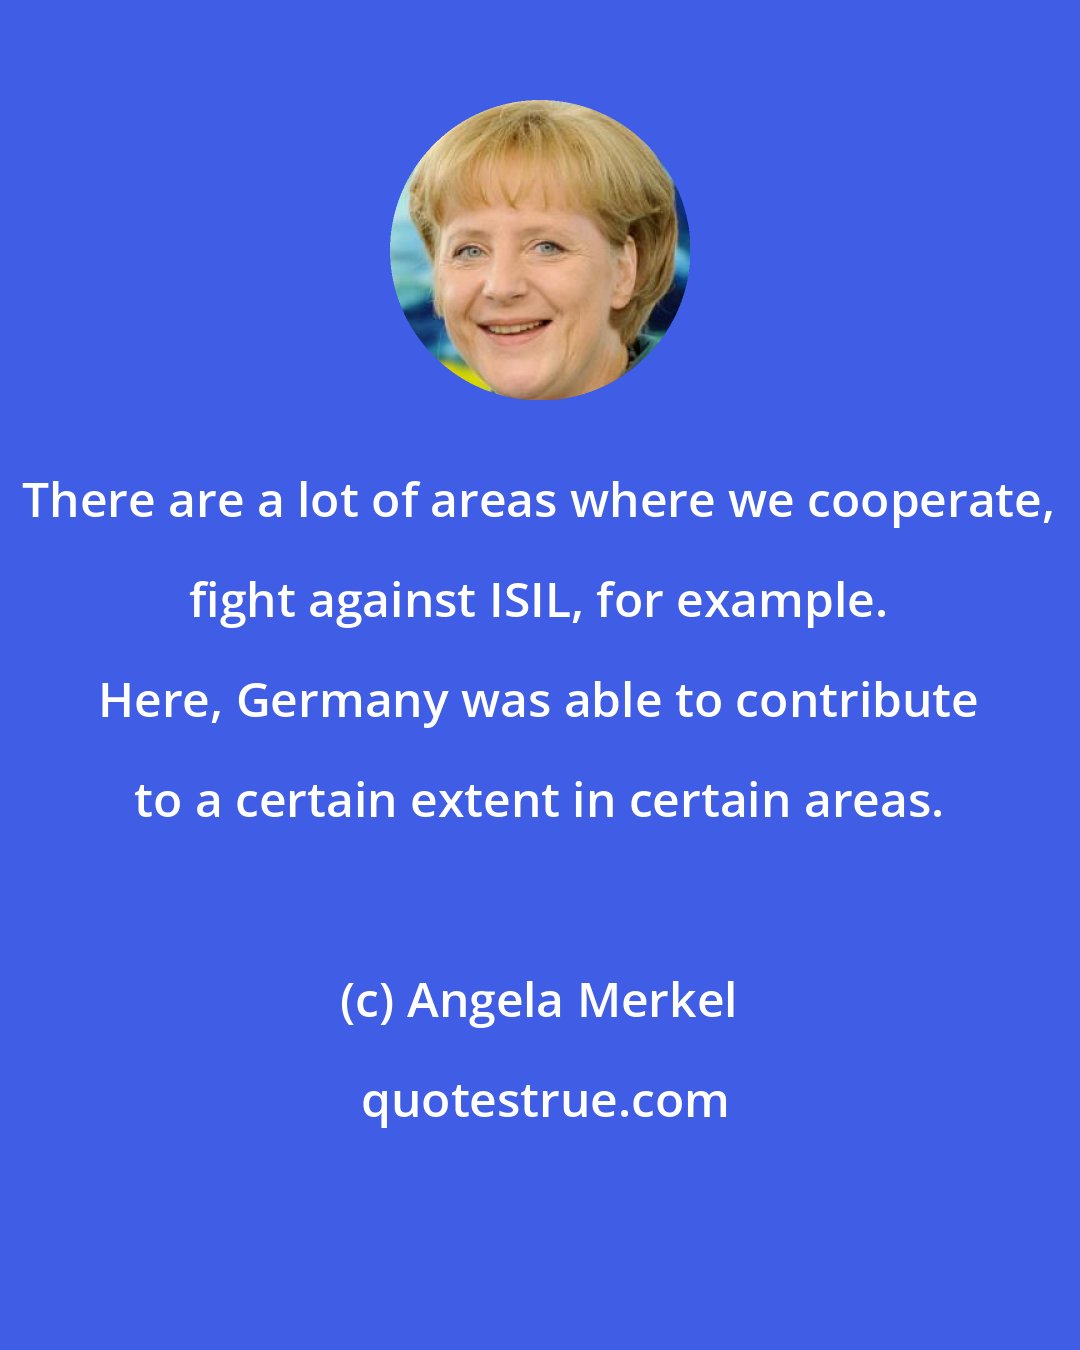 Angela Merkel: There are a lot of areas where we cooperate, fight against ISIL, for example. Here, Germany was able to contribute to a certain extent in certain areas.